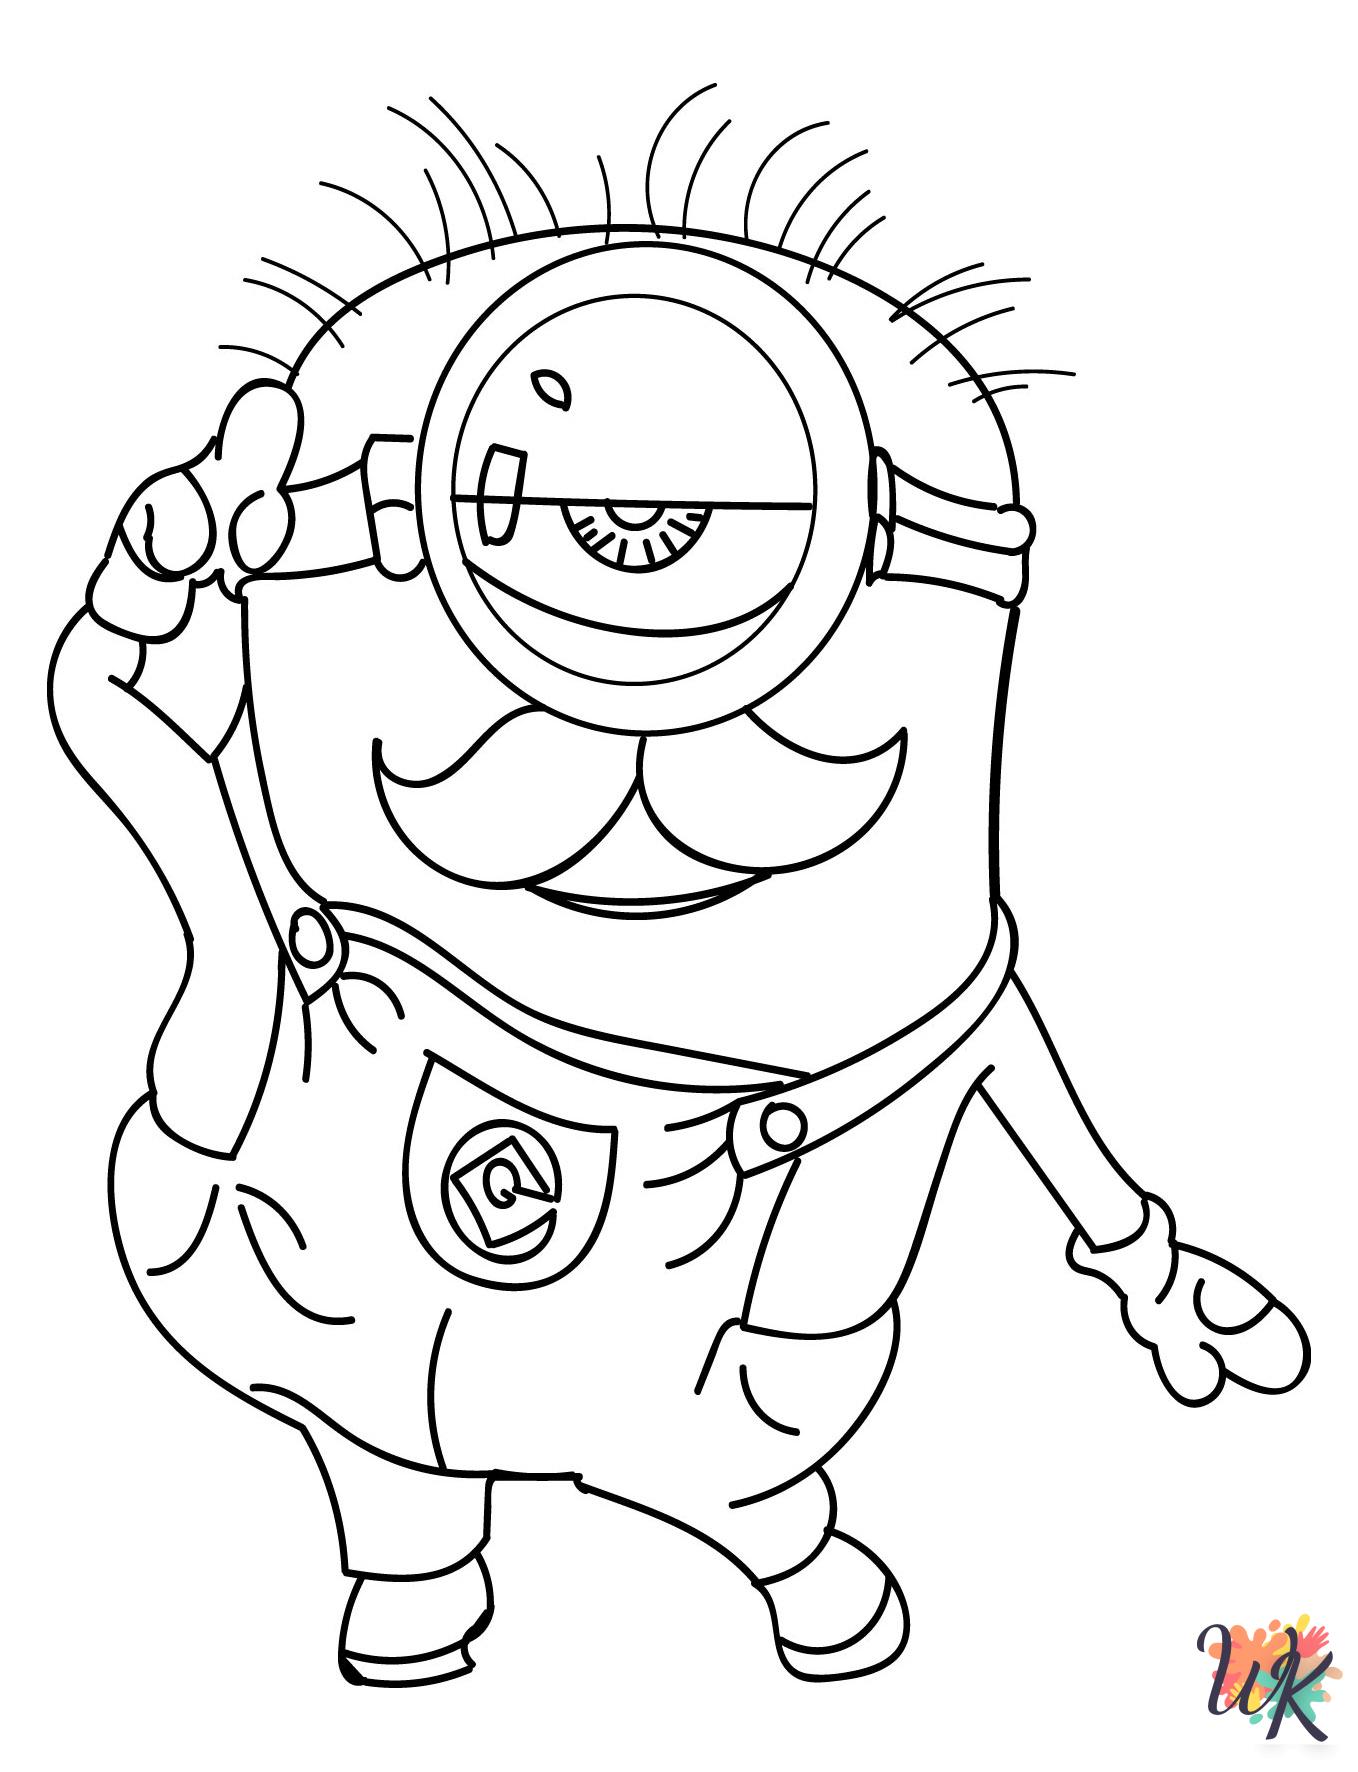 Minions themed coloring pages